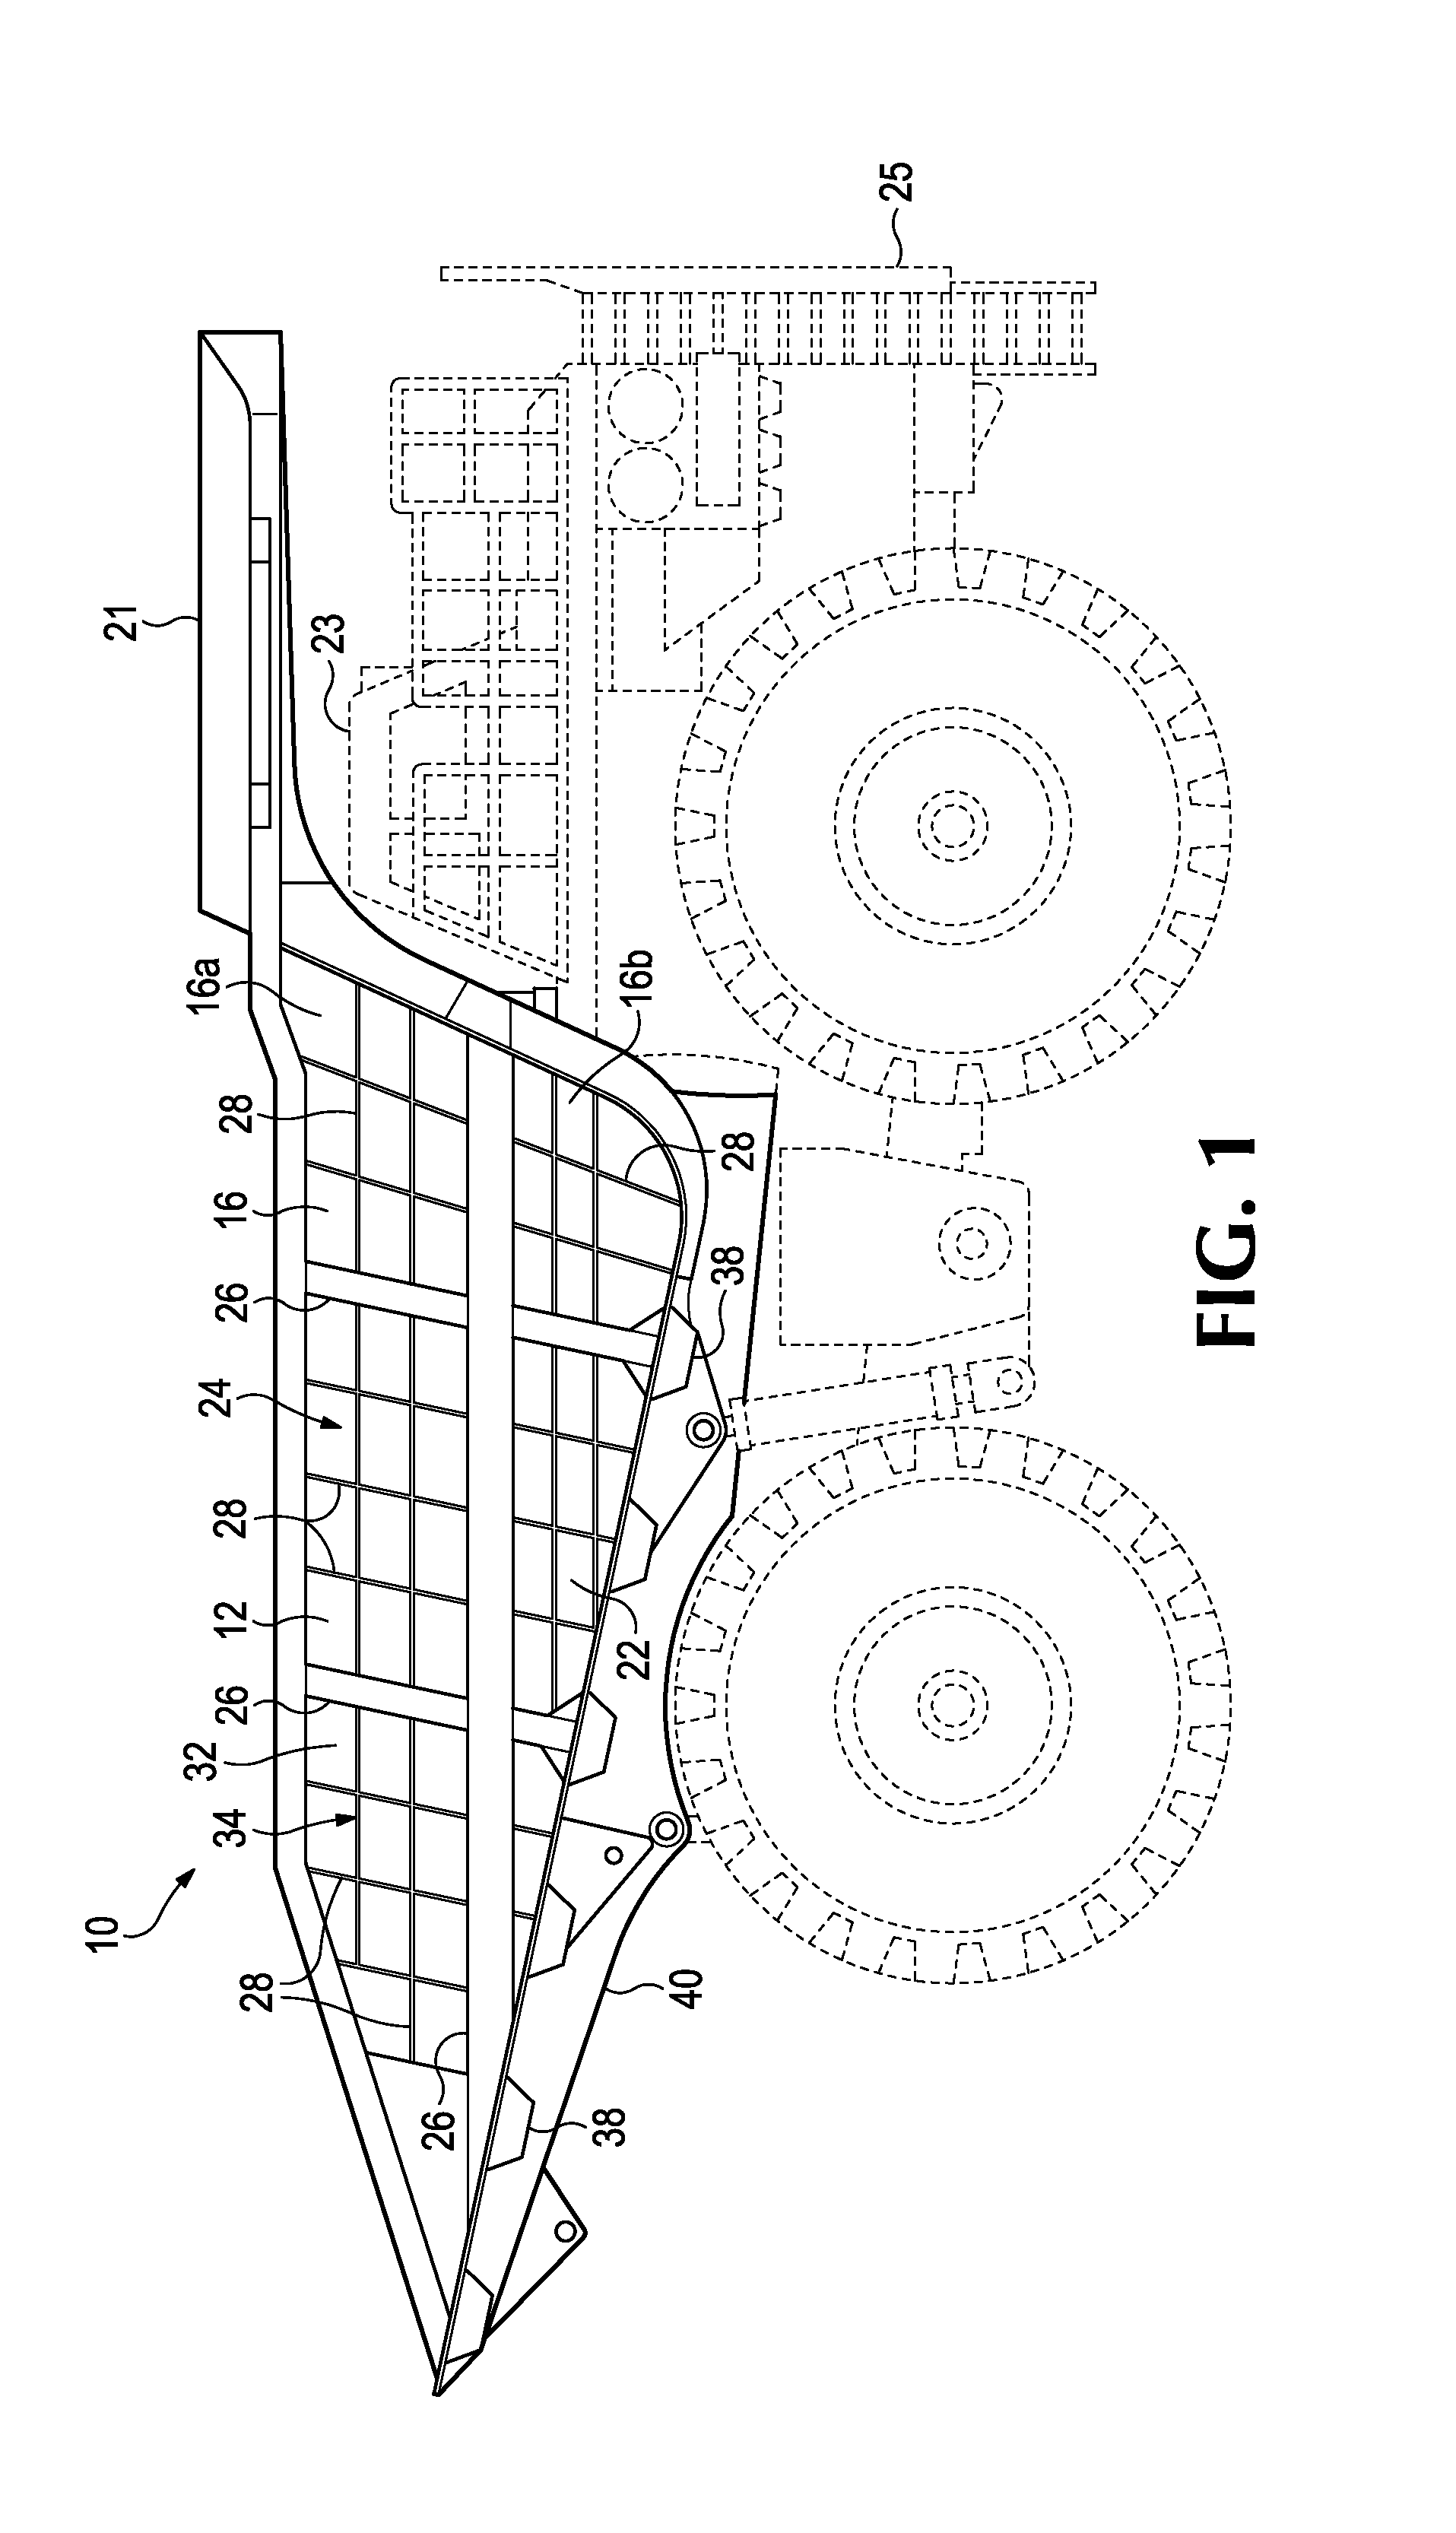 Truck Body For Mining Vehicle